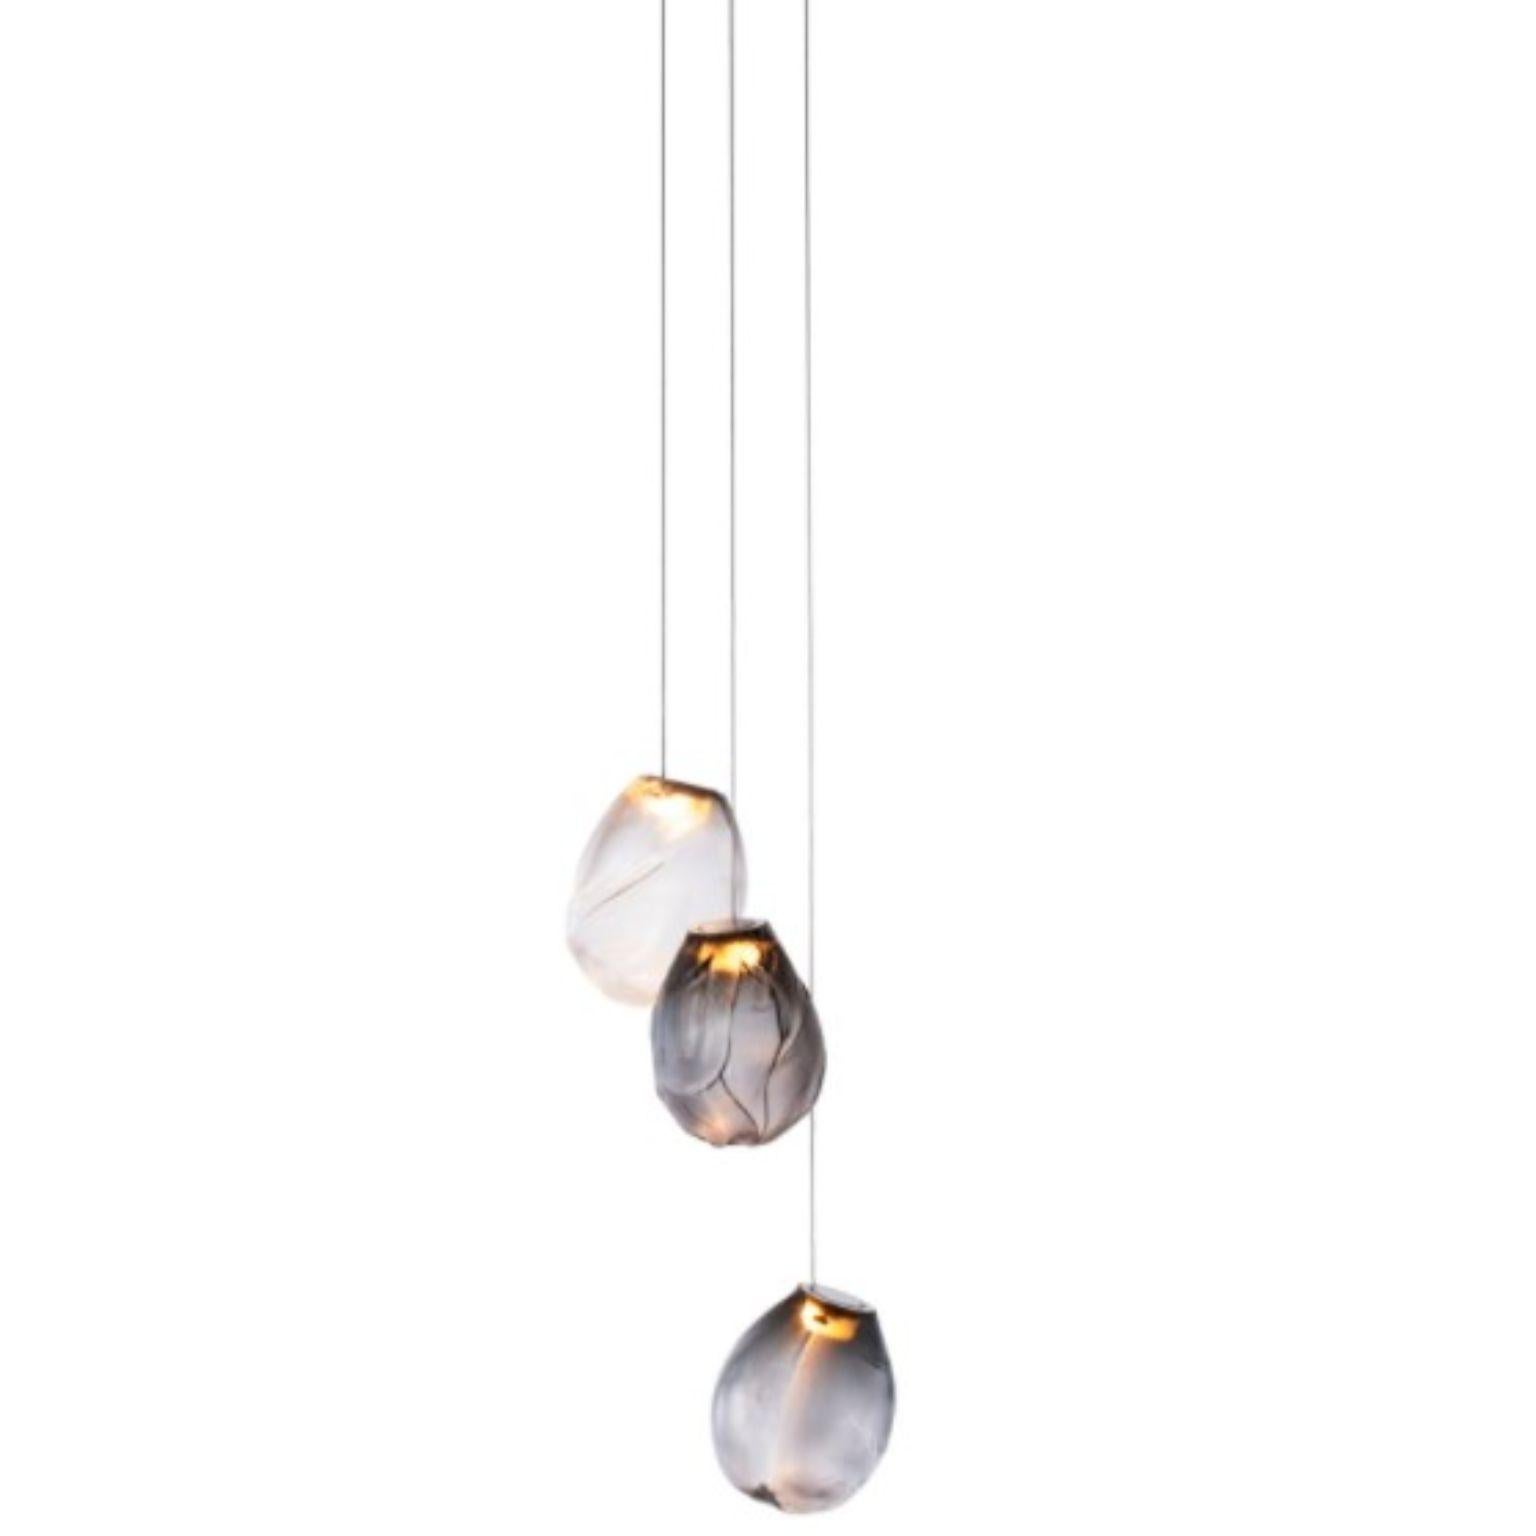 Other 73.3 Pendant by Bocci